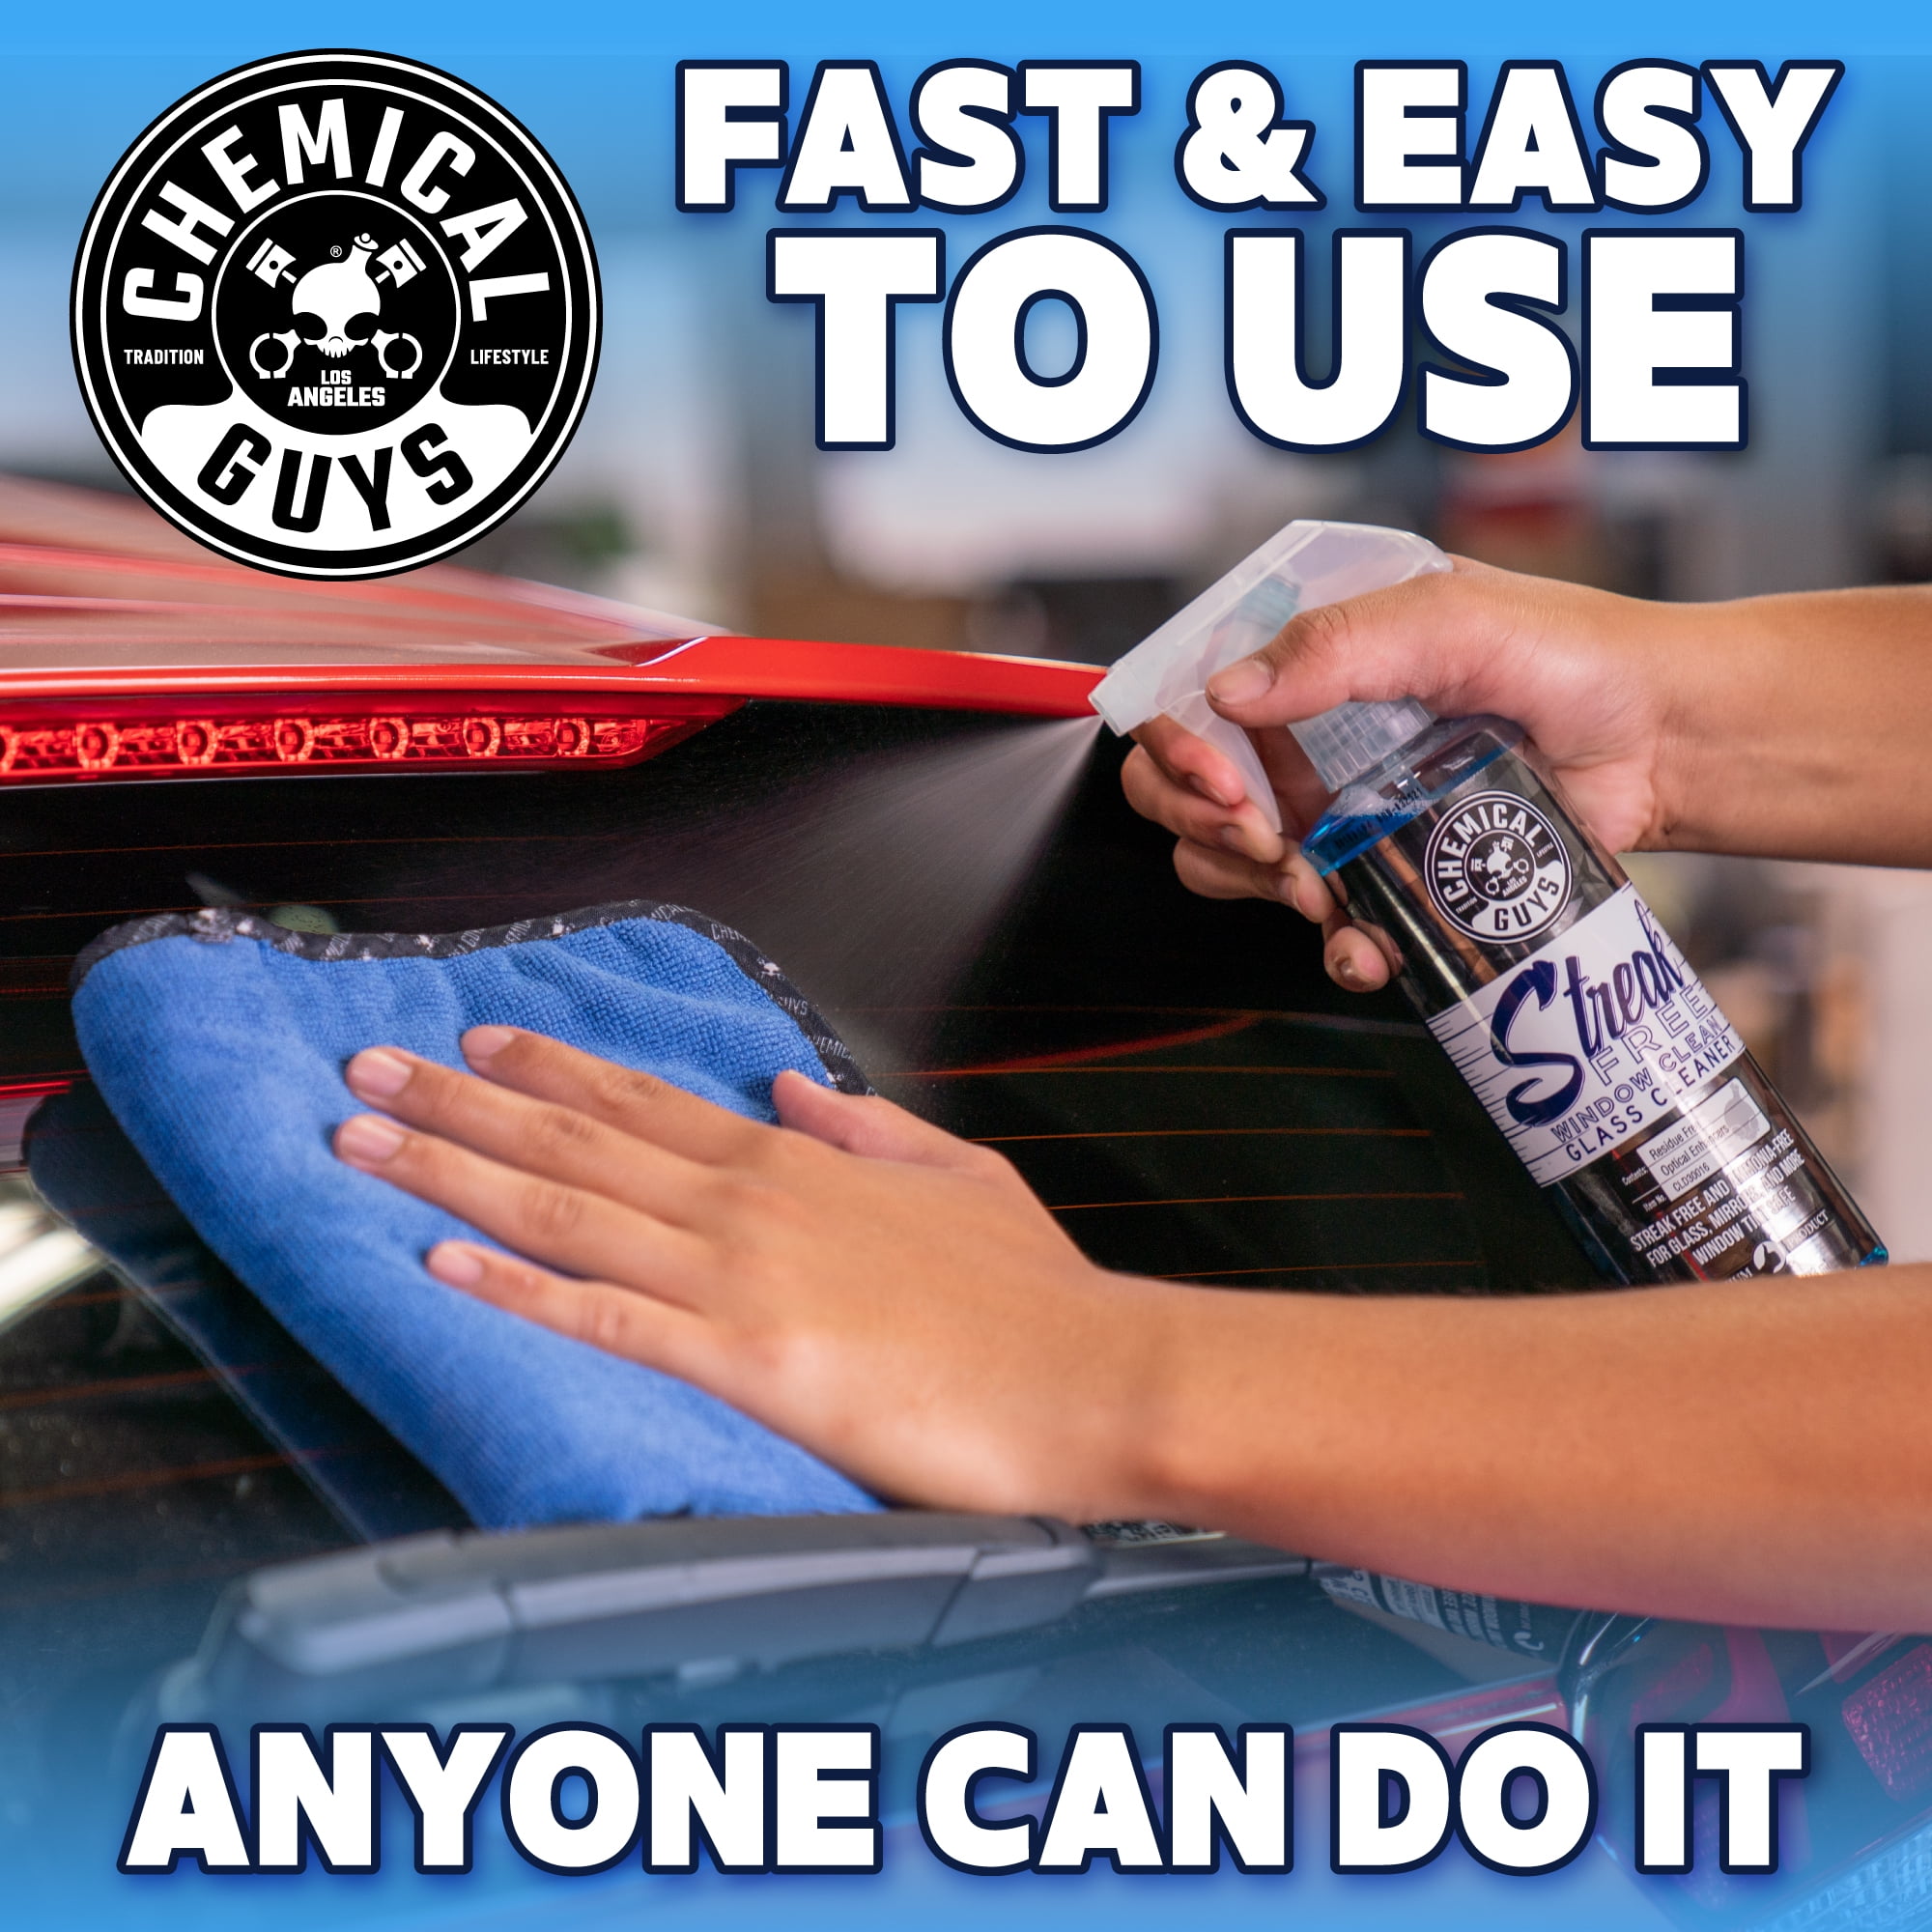 Chemical Guys - Streak Free Glass Cleaner is a gentle tint safe